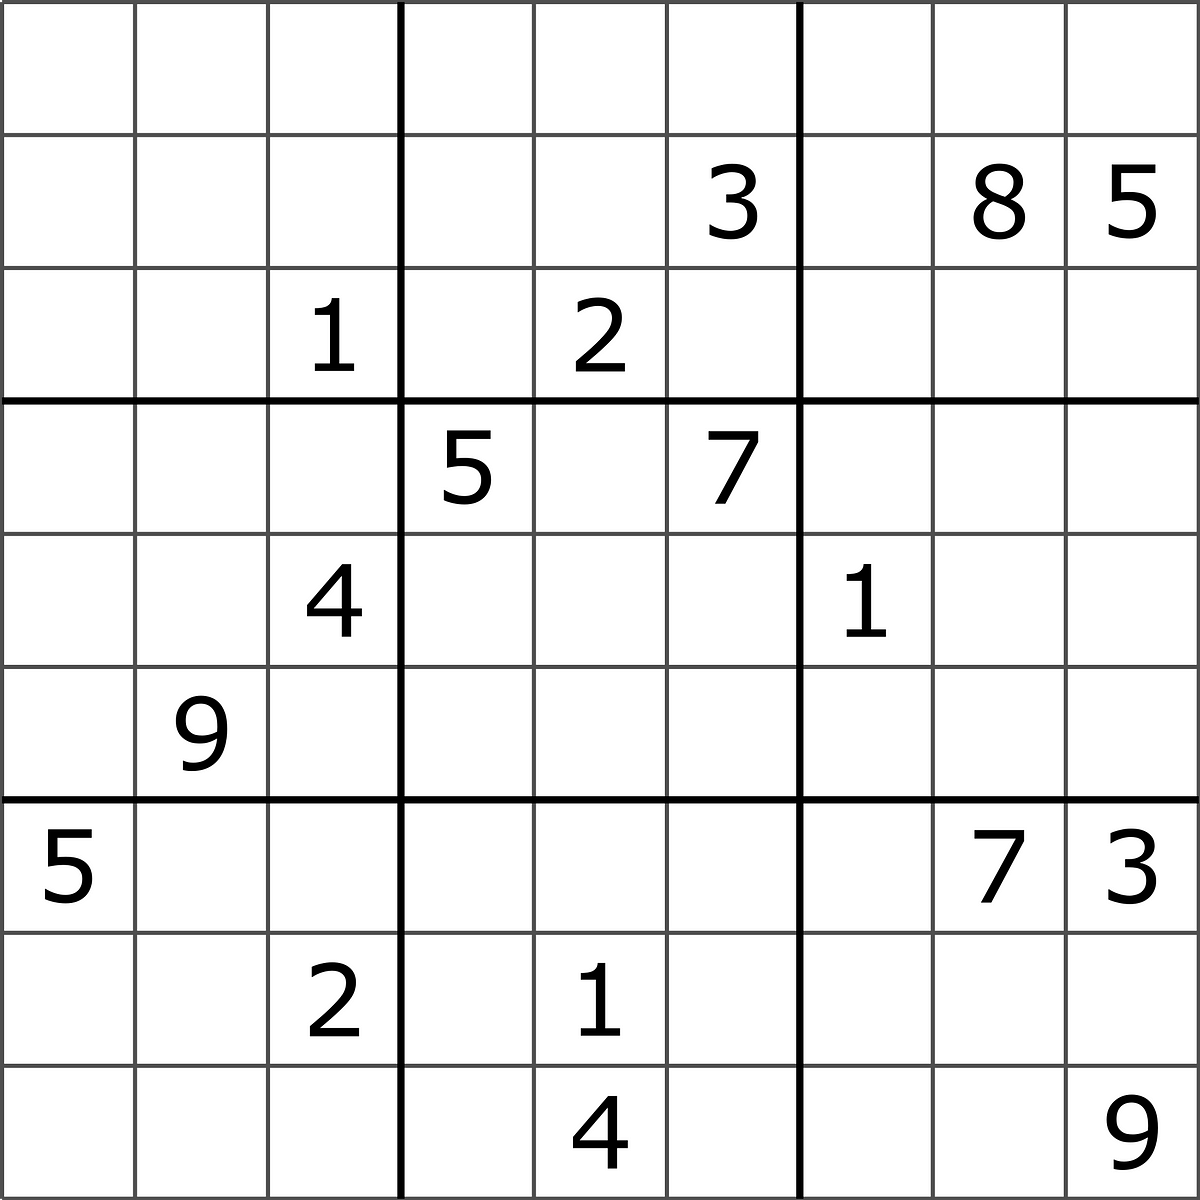 Solving Sudoku using a simple search algorithm | by George Seif | Medium